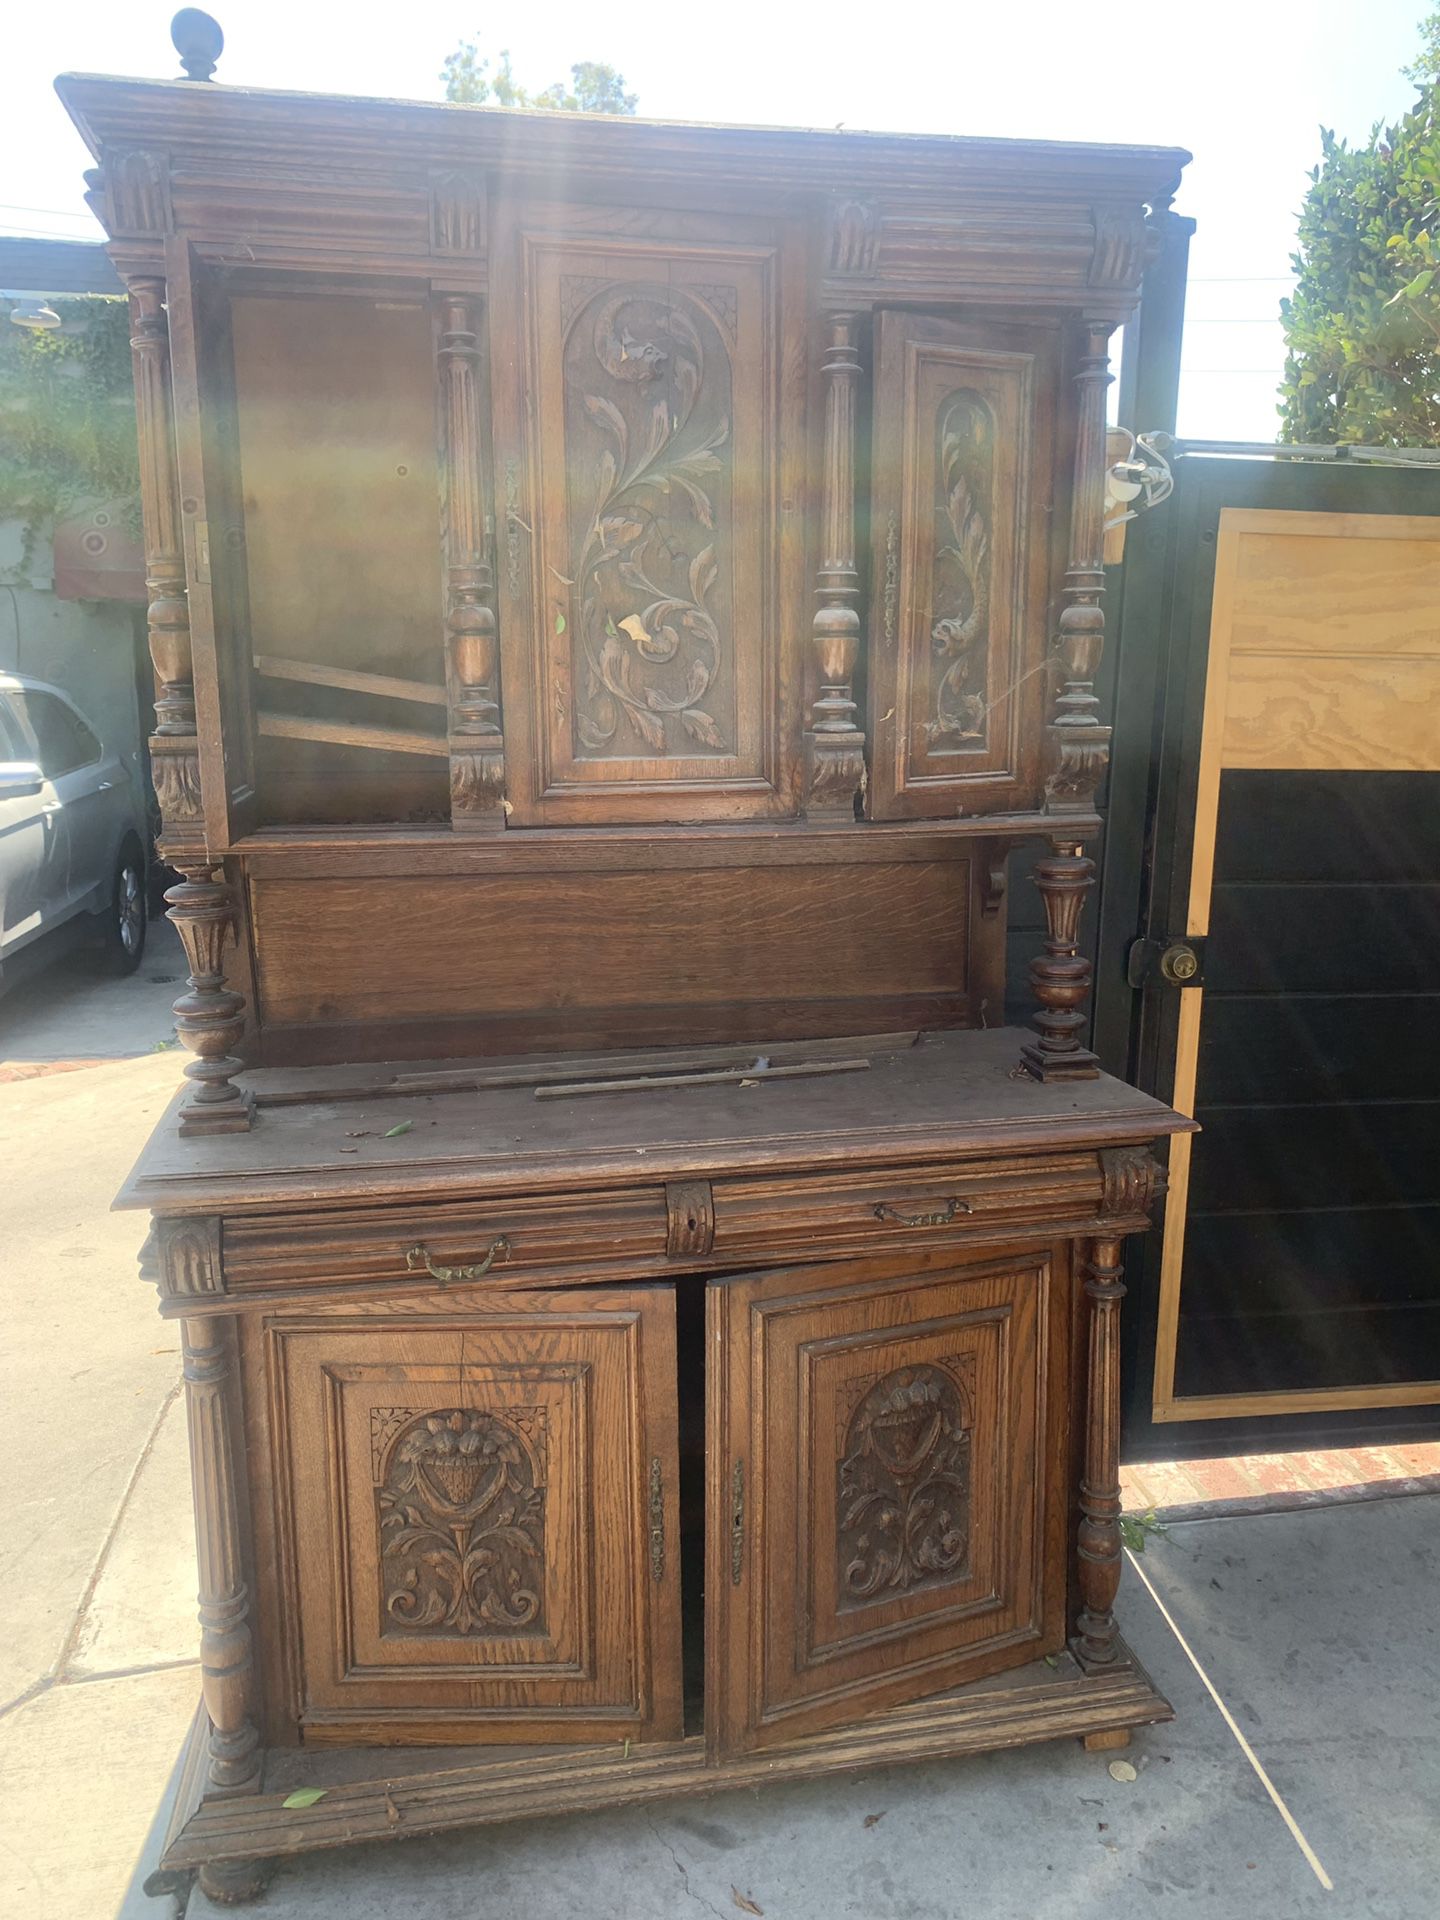 Antiques for sell 600 for all need to get rid of